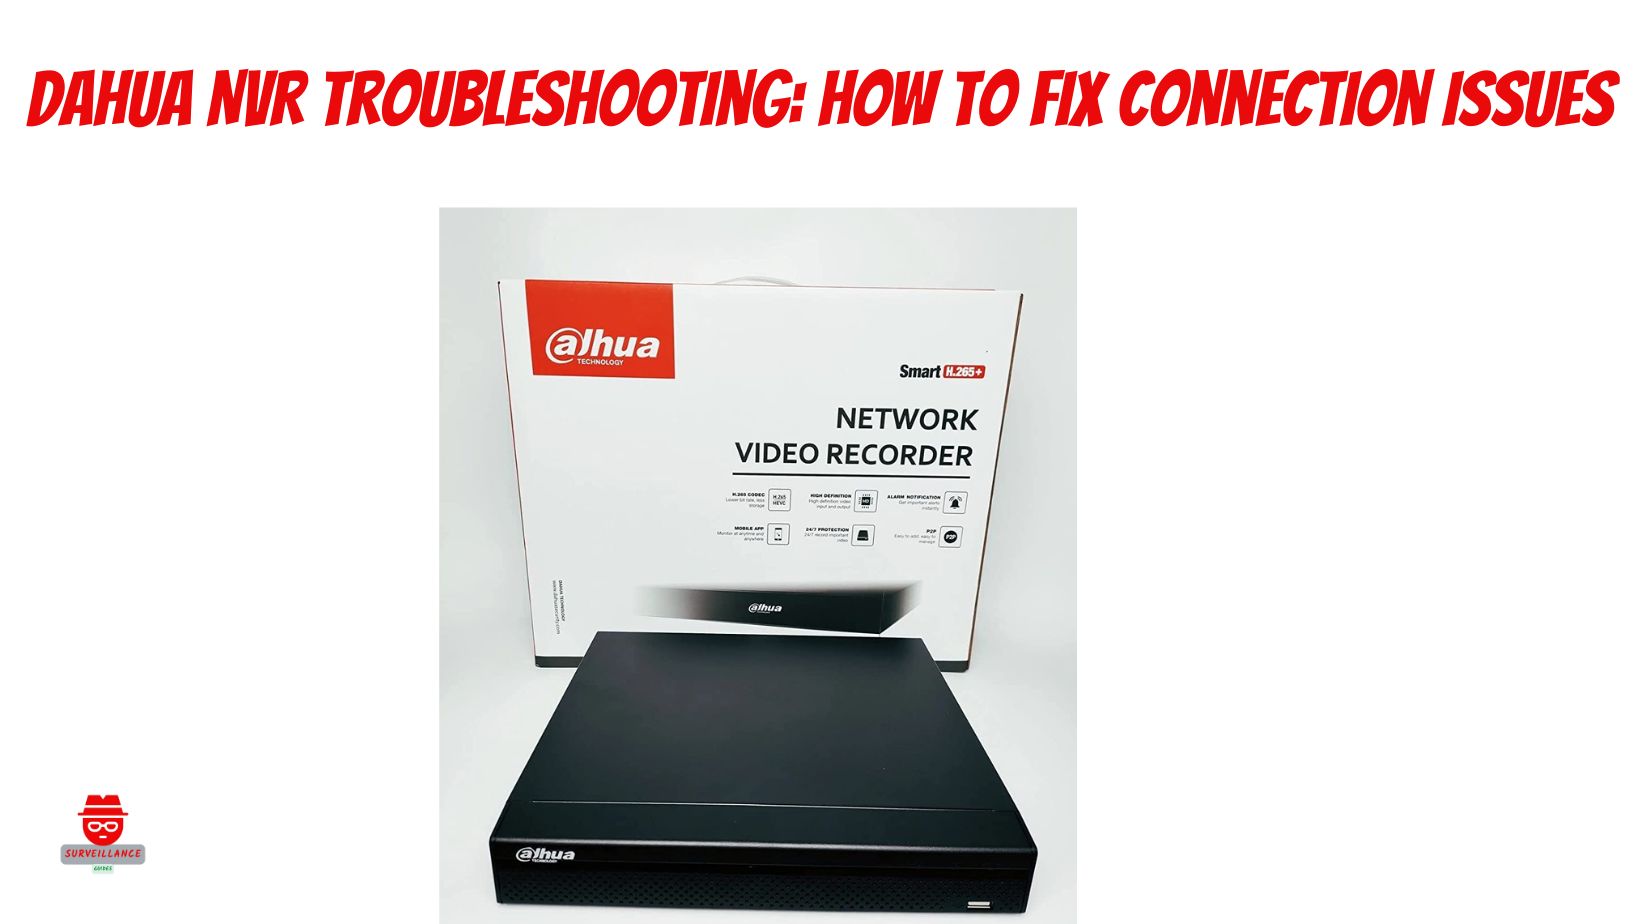 Dahua NVR Troubleshooting How to Fix Connection Issues